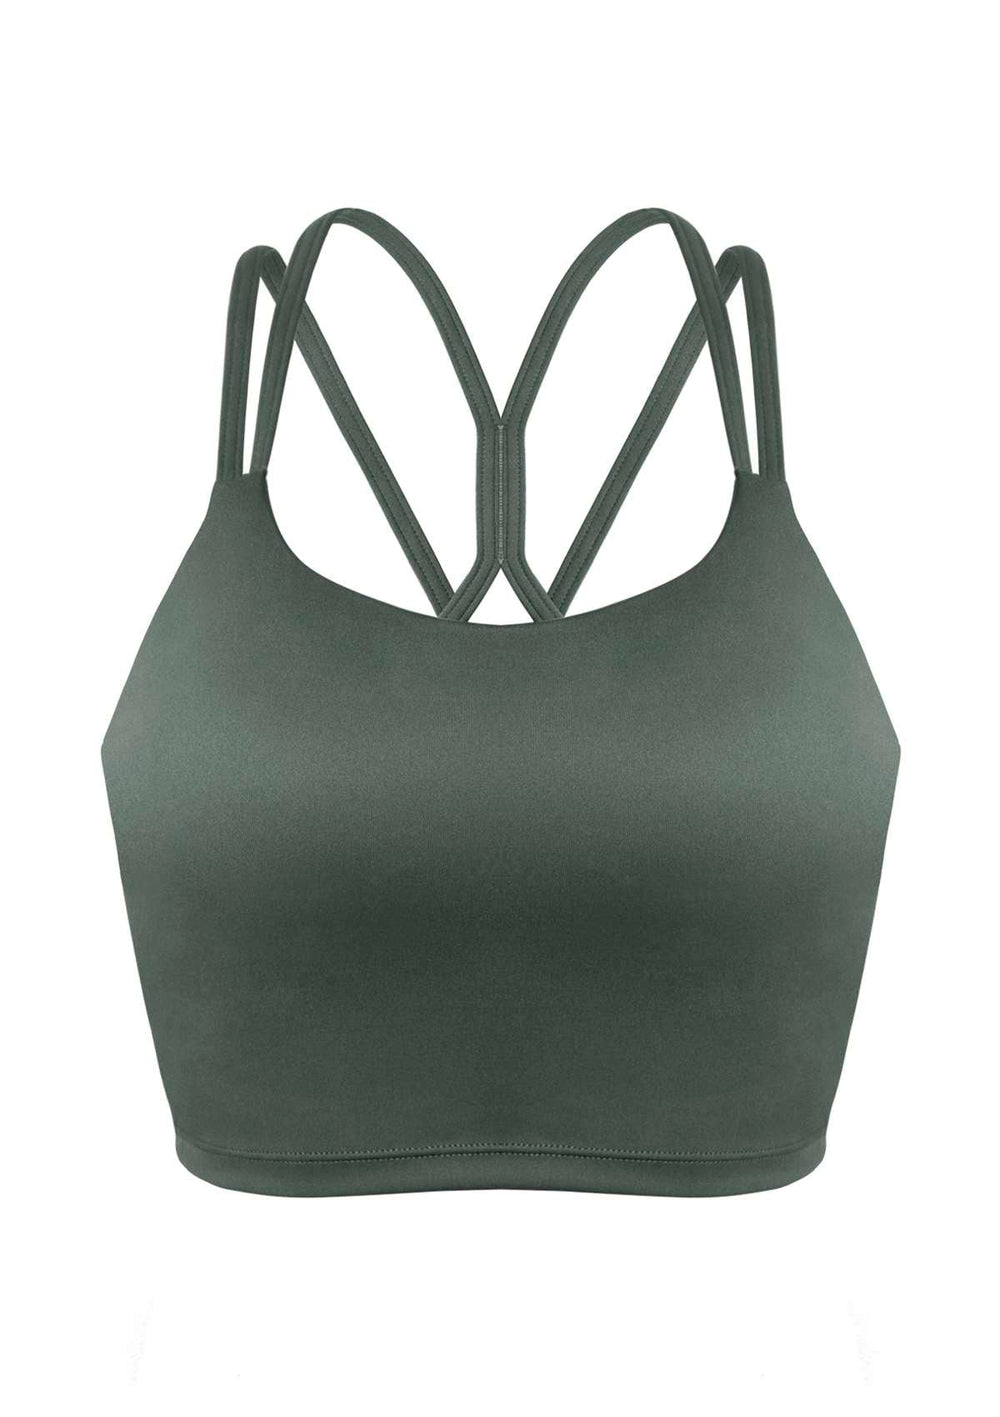 Glyder, Intimates & Sleepwear, Glyder Full Force High Impact Sports Bra  Workout Support Olive Green Cross Strap